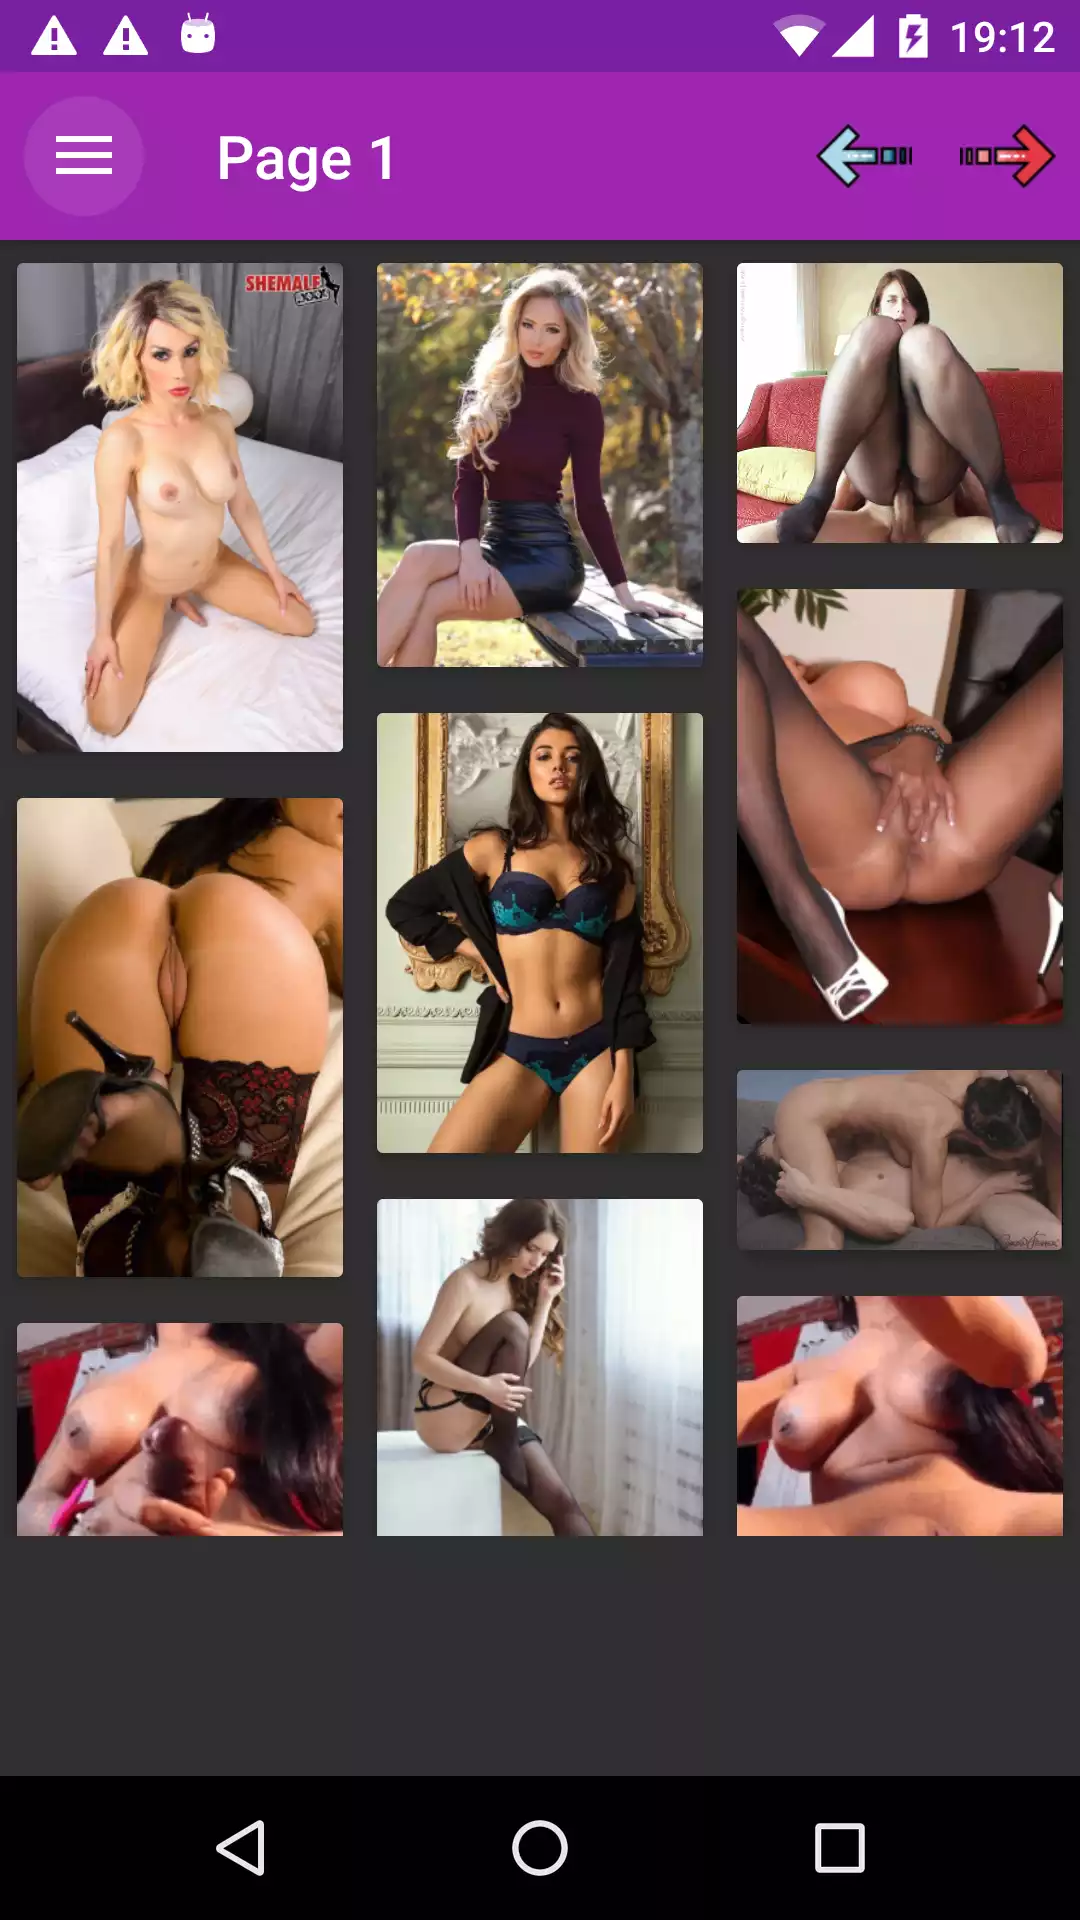 Sexy Group Sex Pics photos,wallpapers,image,mythras,puzzle,android,hentia,hentai,feast,lair,apk,sexy,aps,download,fuck,panties,porn,offline,picture,shrinking,dreams,hentay,hentie,and,demonic,pics,ebony